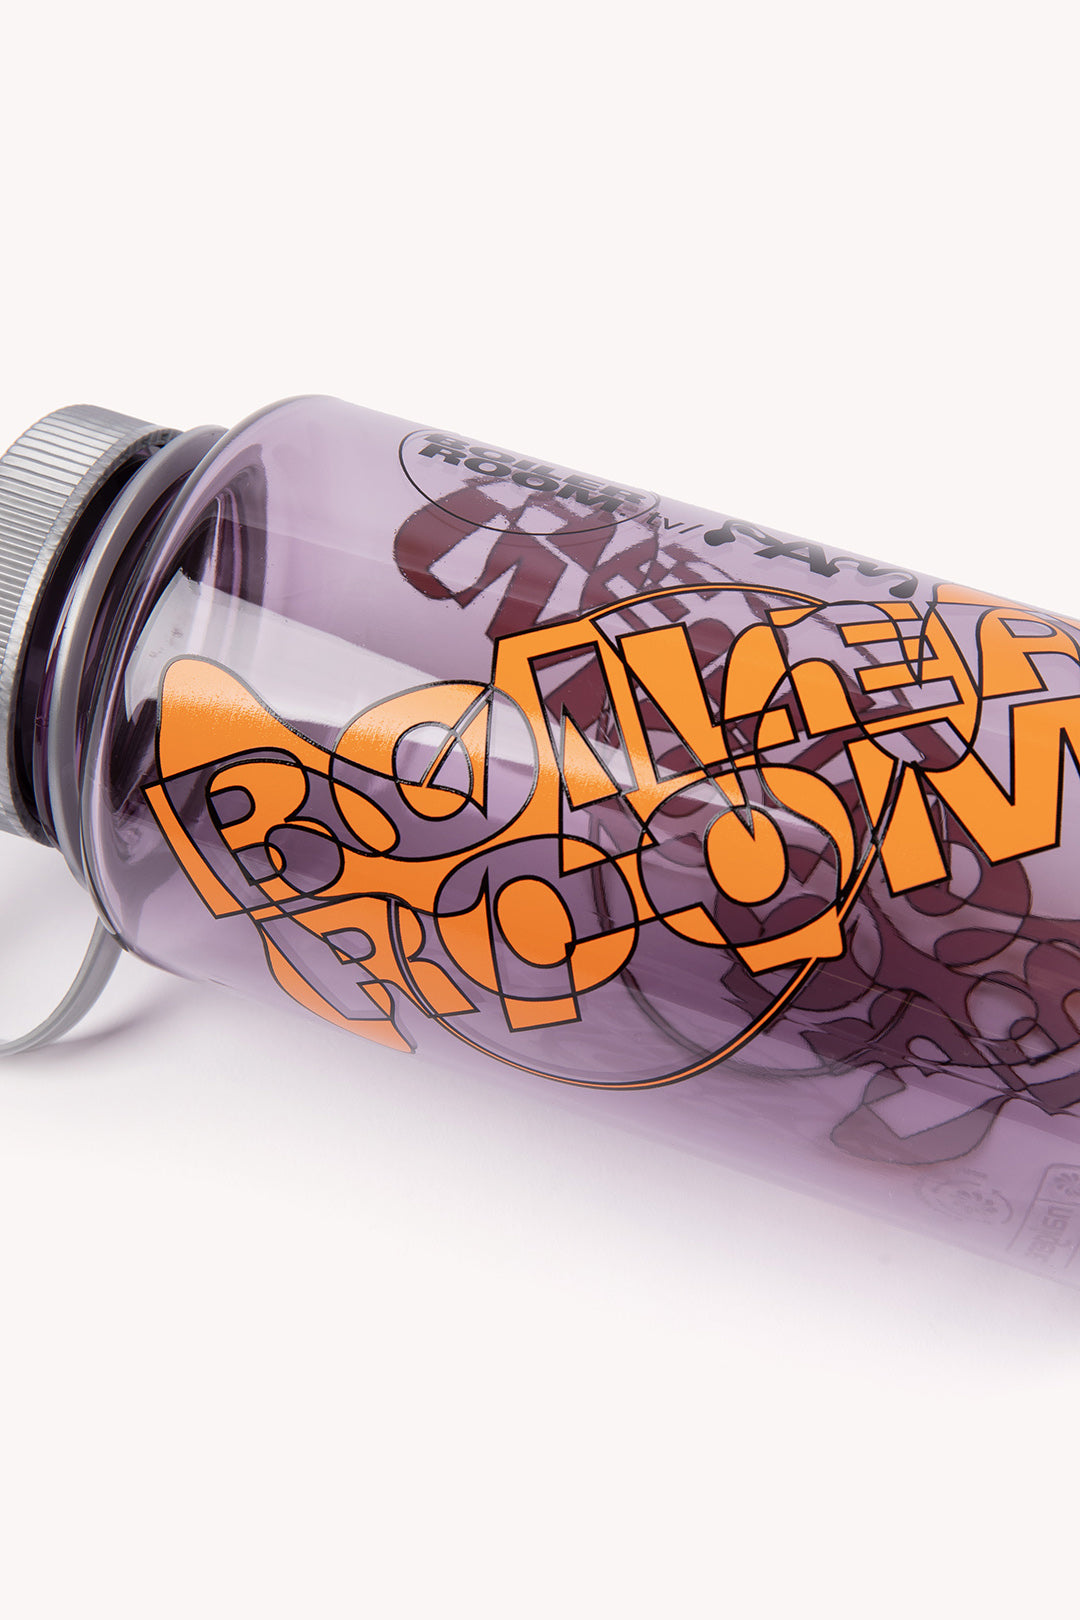 The BOILER ROOM x P.A.M. NALGENE BOTTLE  available online with global shipping, and in PAM Stores Melbourne and Sydney.